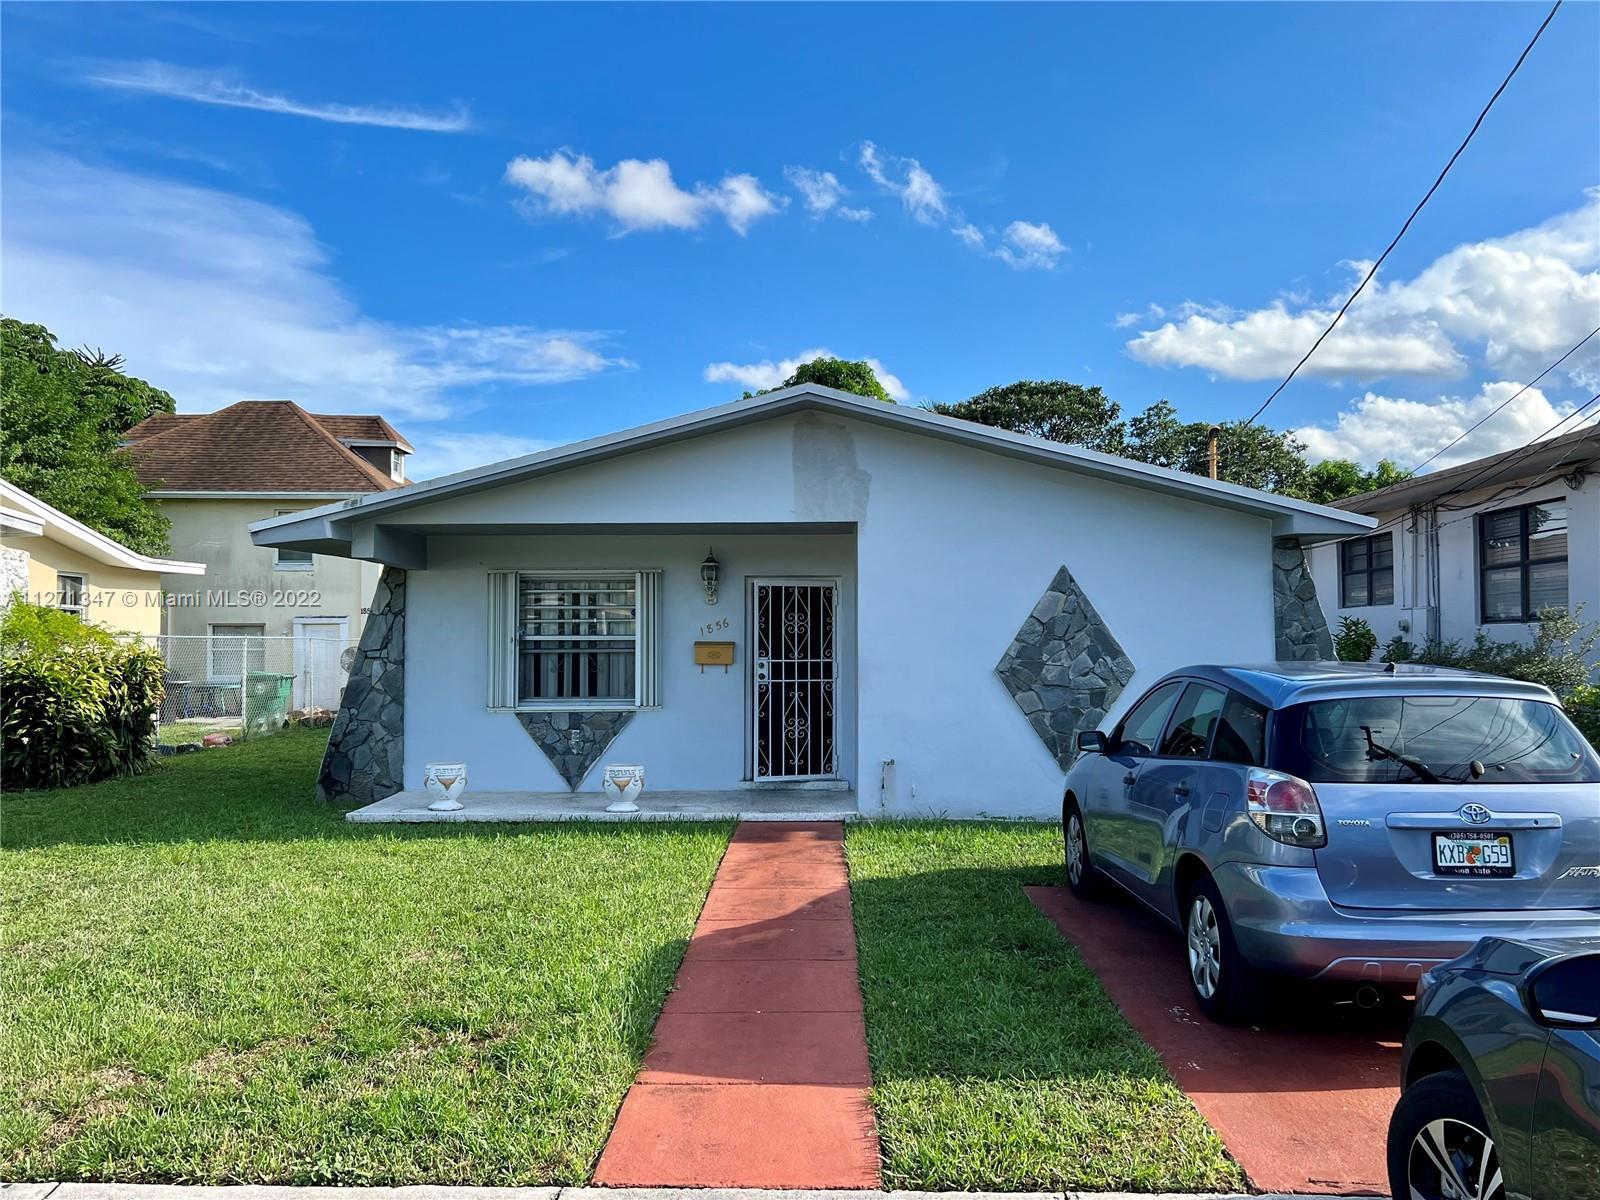 Photo of 1856 NW 51st Ter in Miami, FL